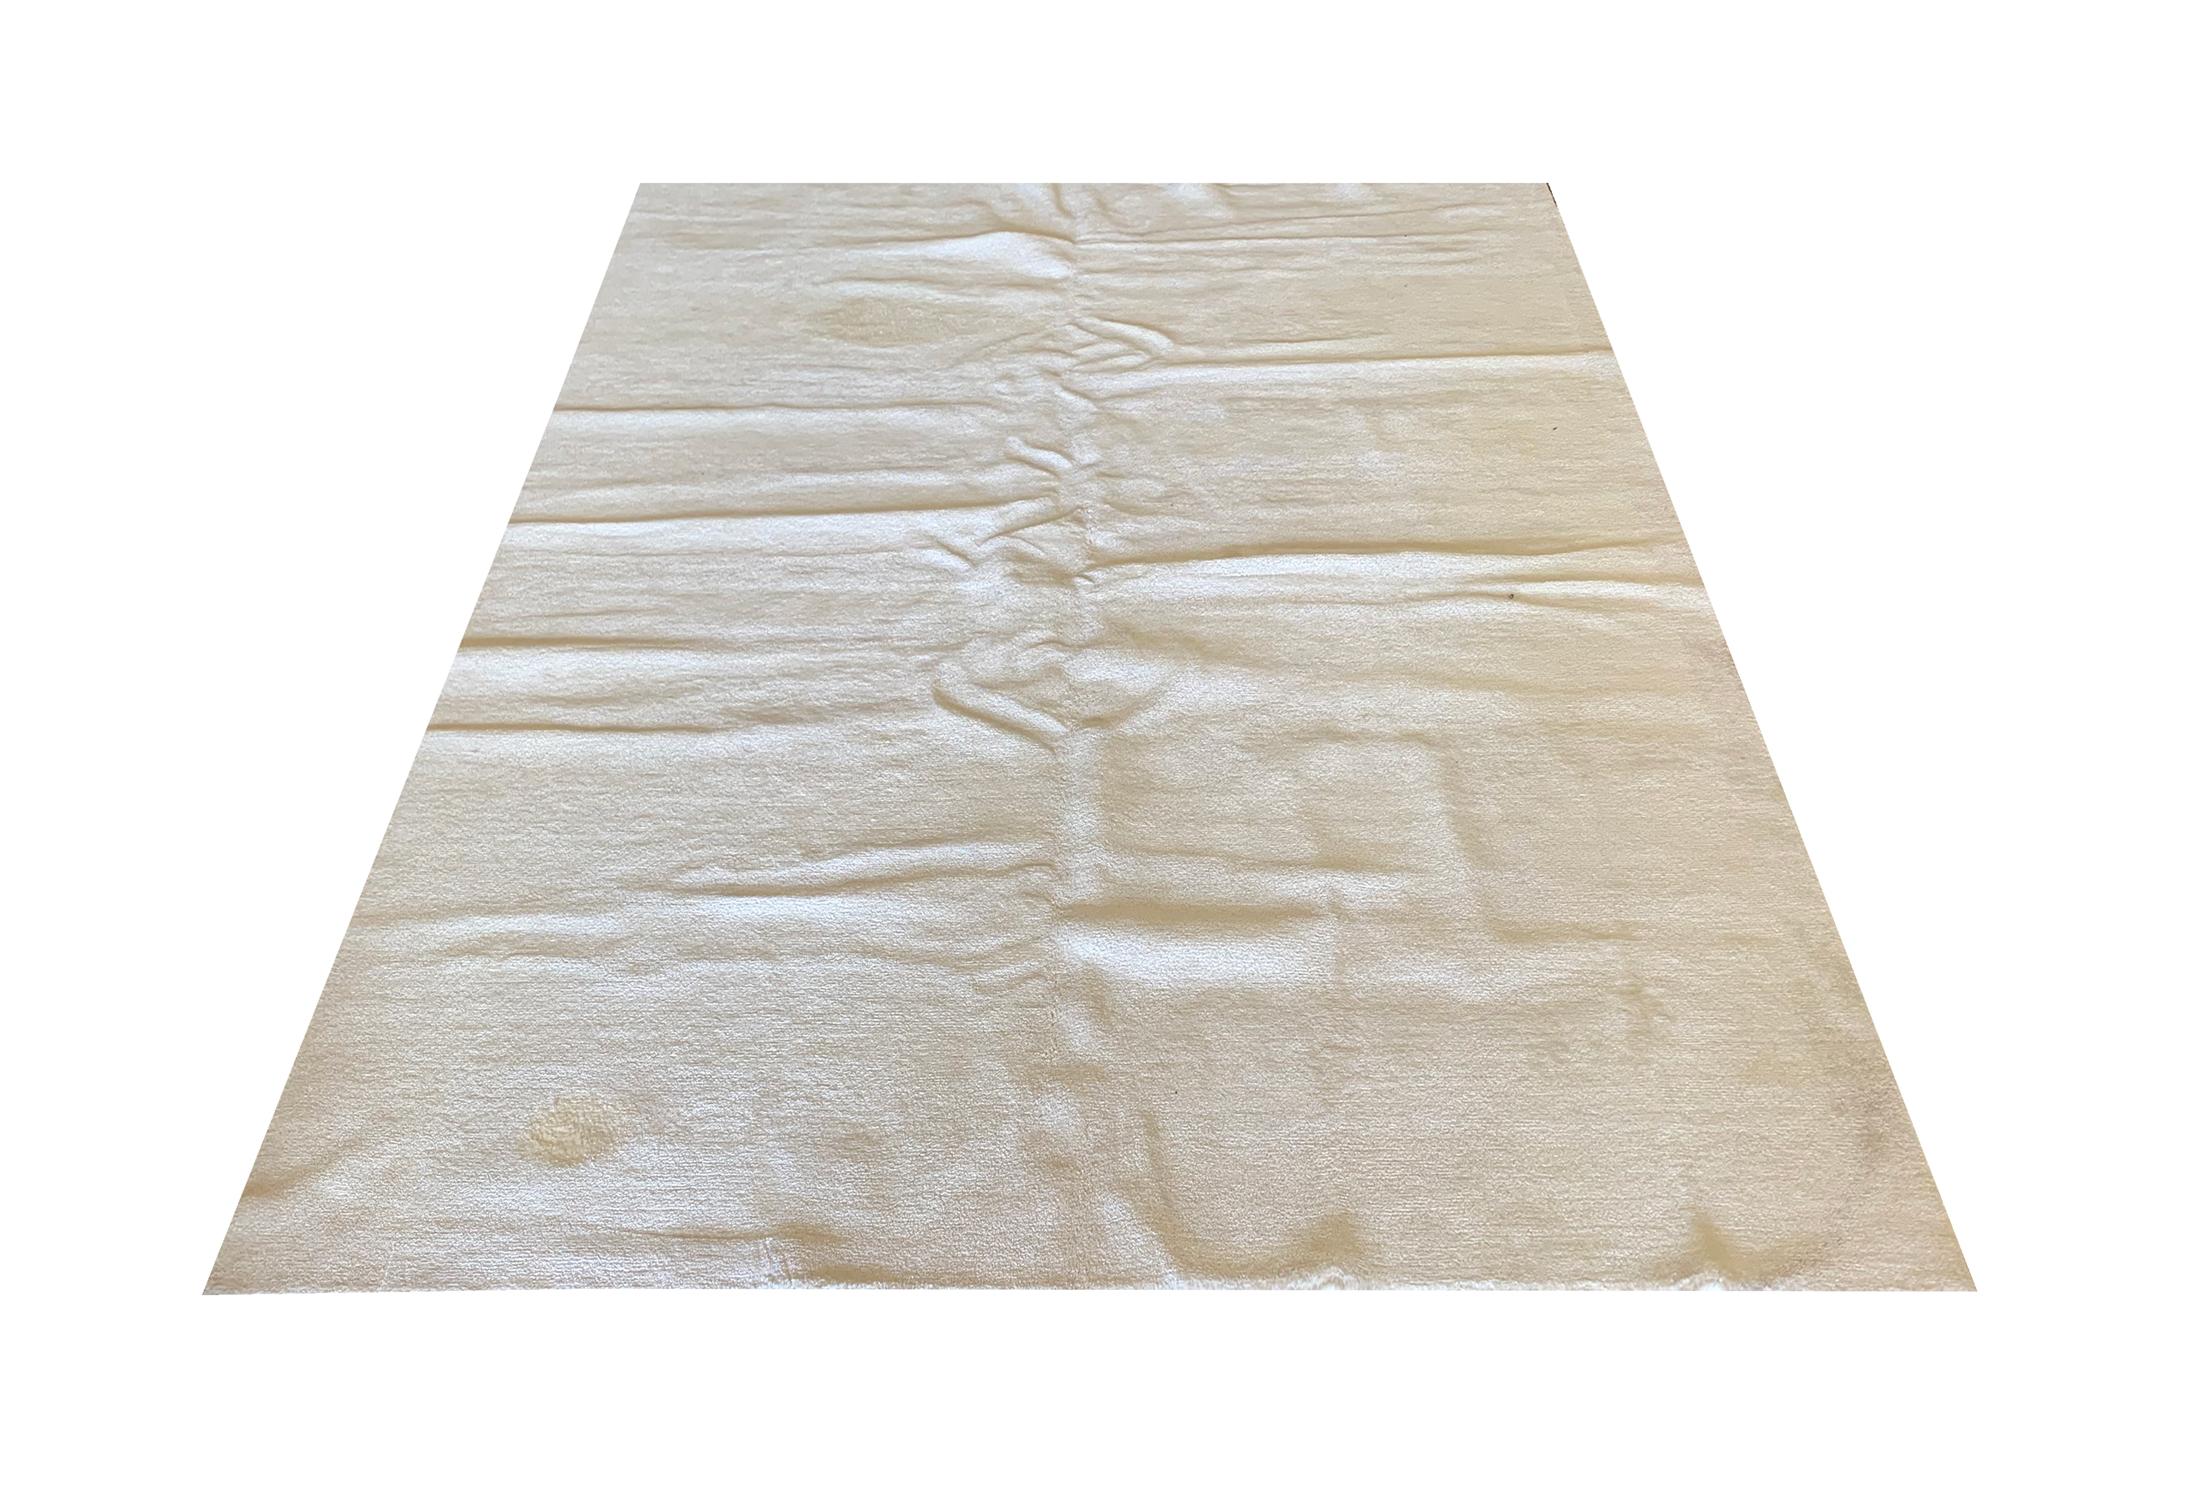 This sleek cream wool pile carpet is a minimalist piece woven by hand in India in the early 20th century, circa 1900. This subtle block colour area rug is simple yet beautiful, hand-knotted with a dense pile; this carpet is sure to elevate any room